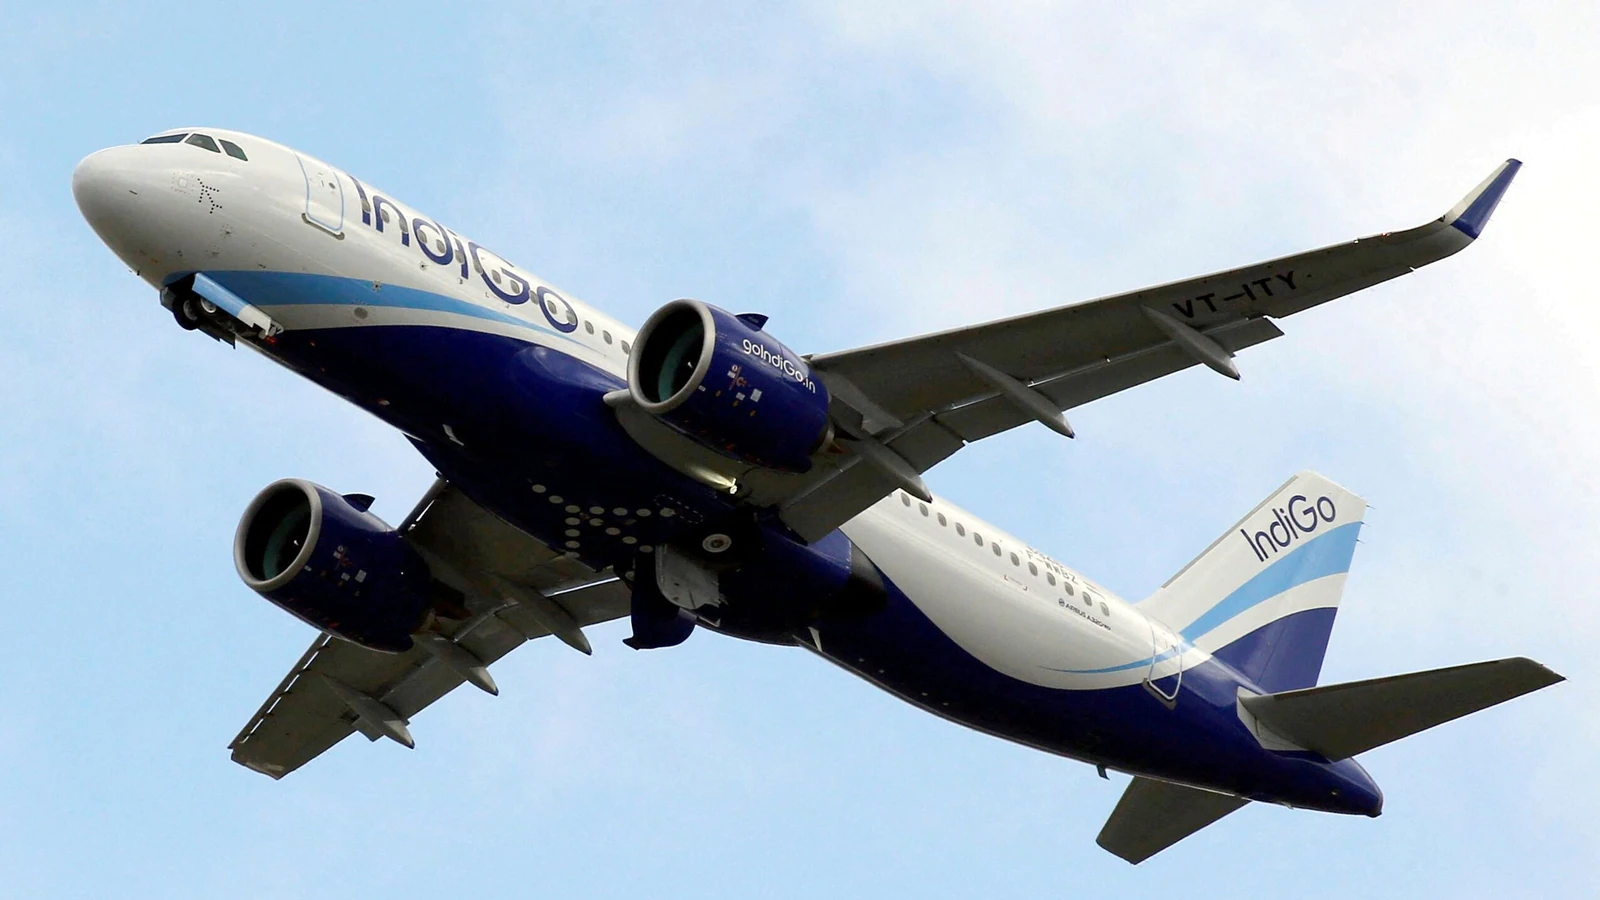 Man ‘hacks’ IndiGo website to find lost luggage, airline says ‘at no point…’